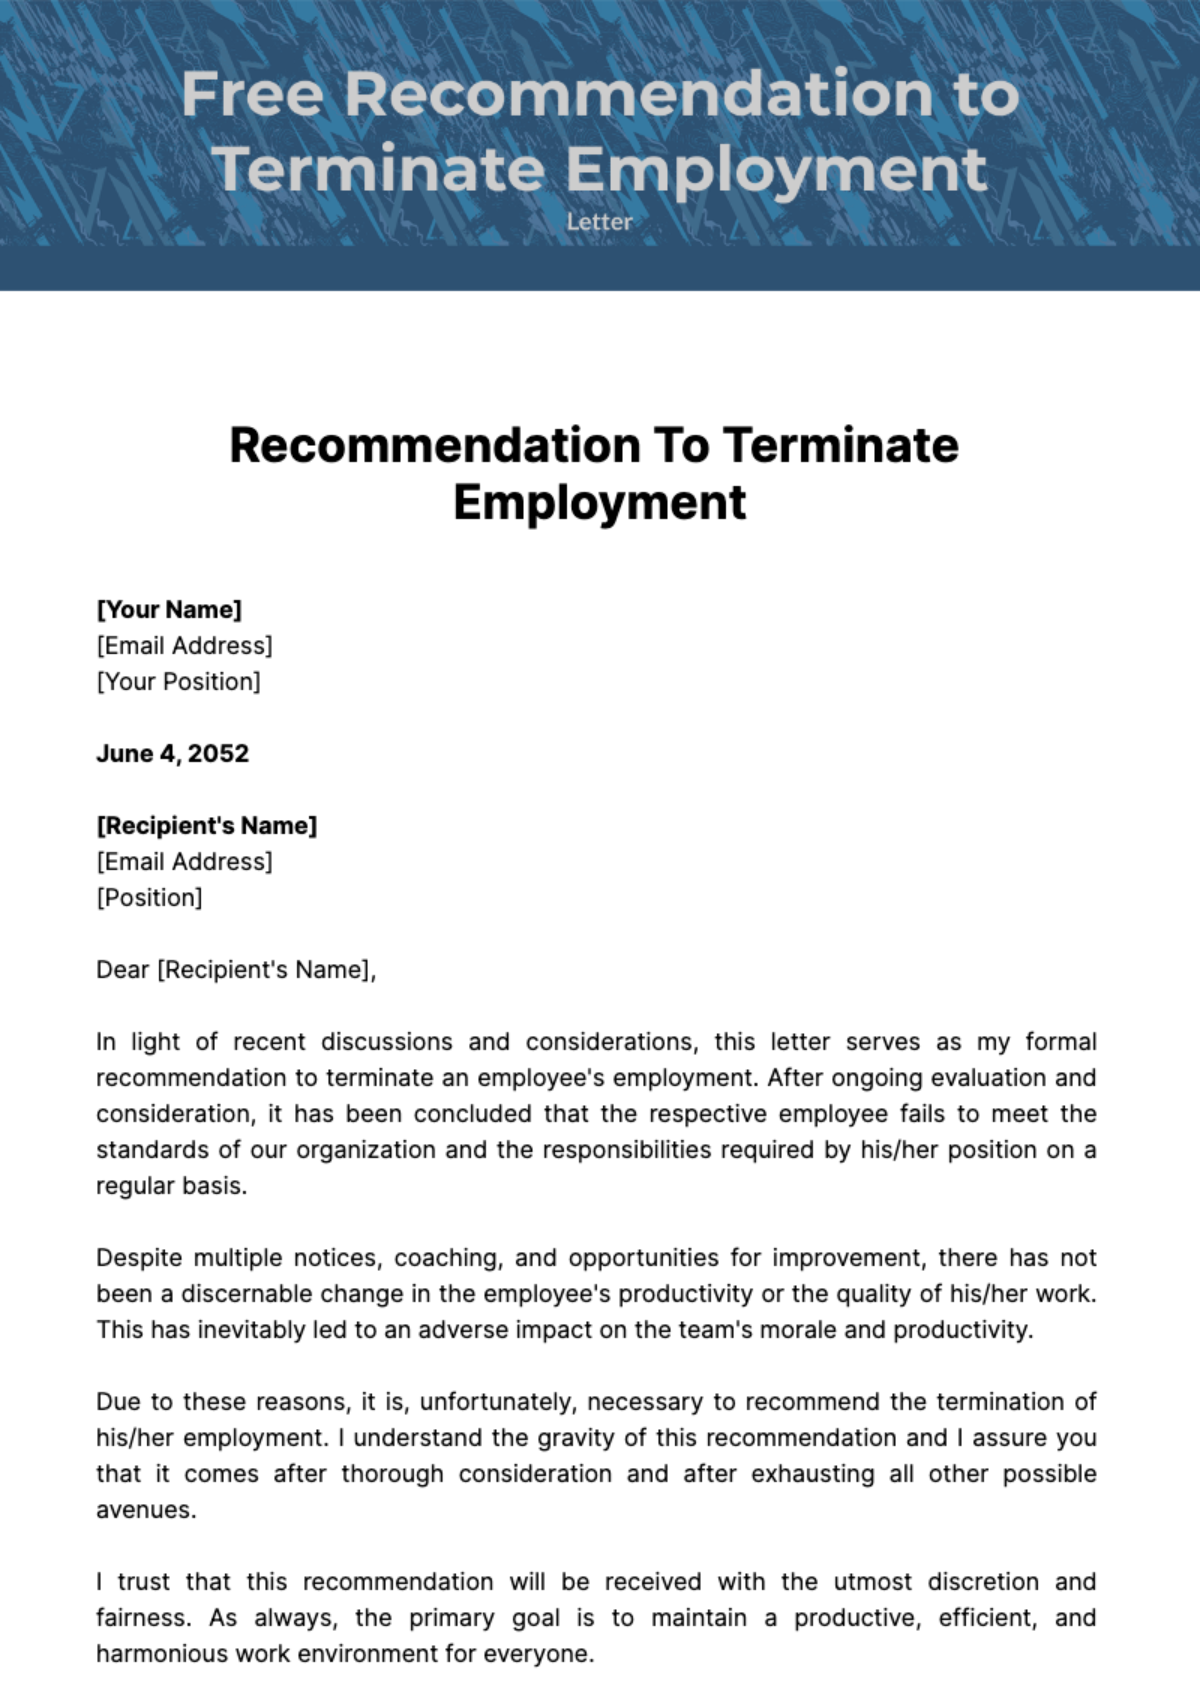 Free Recommendation to Terminate Employment Letter Template